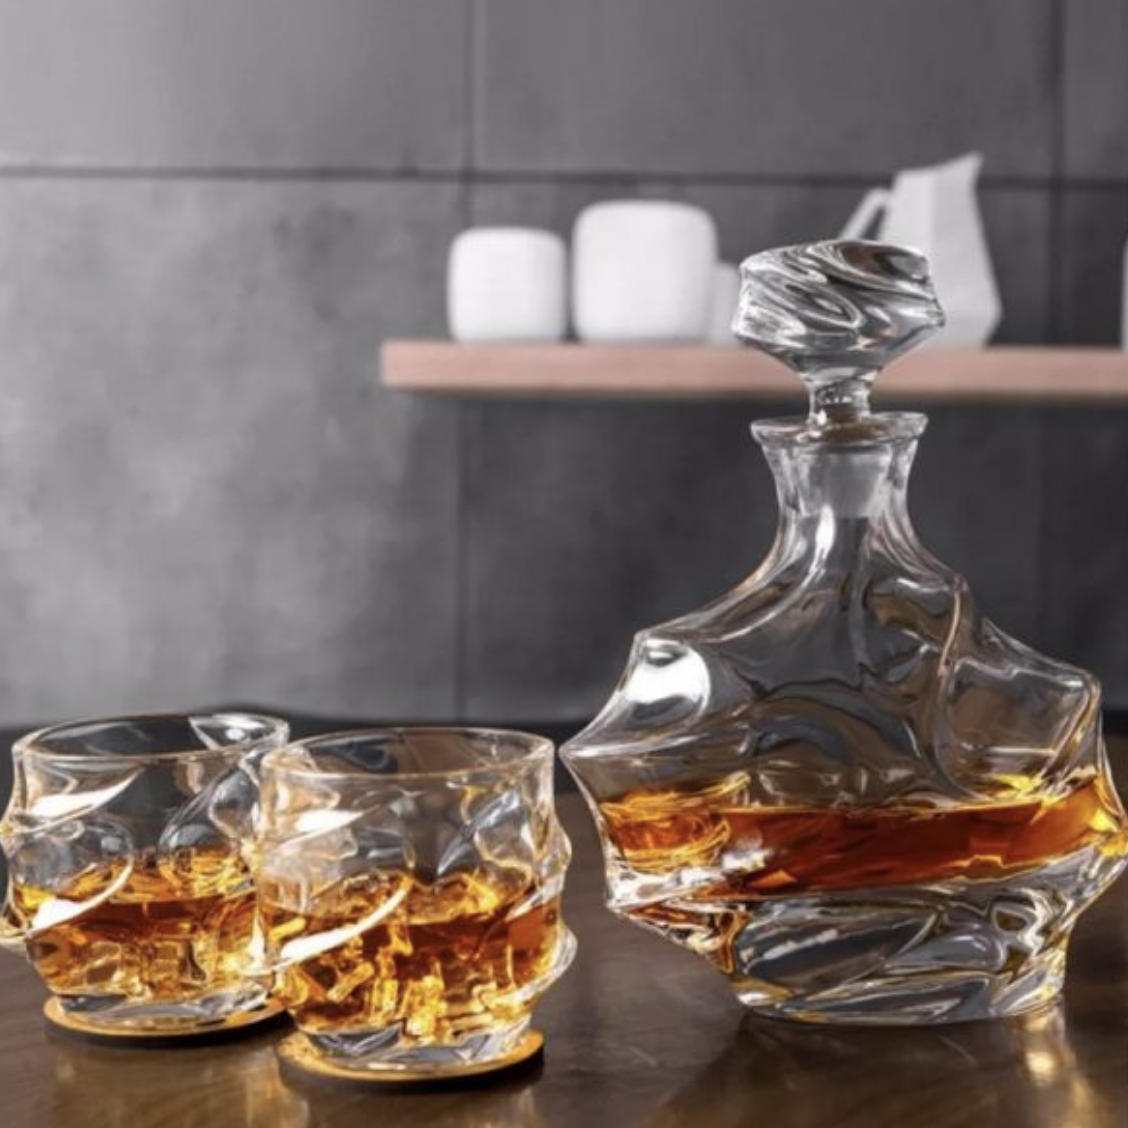 whiskey glass png